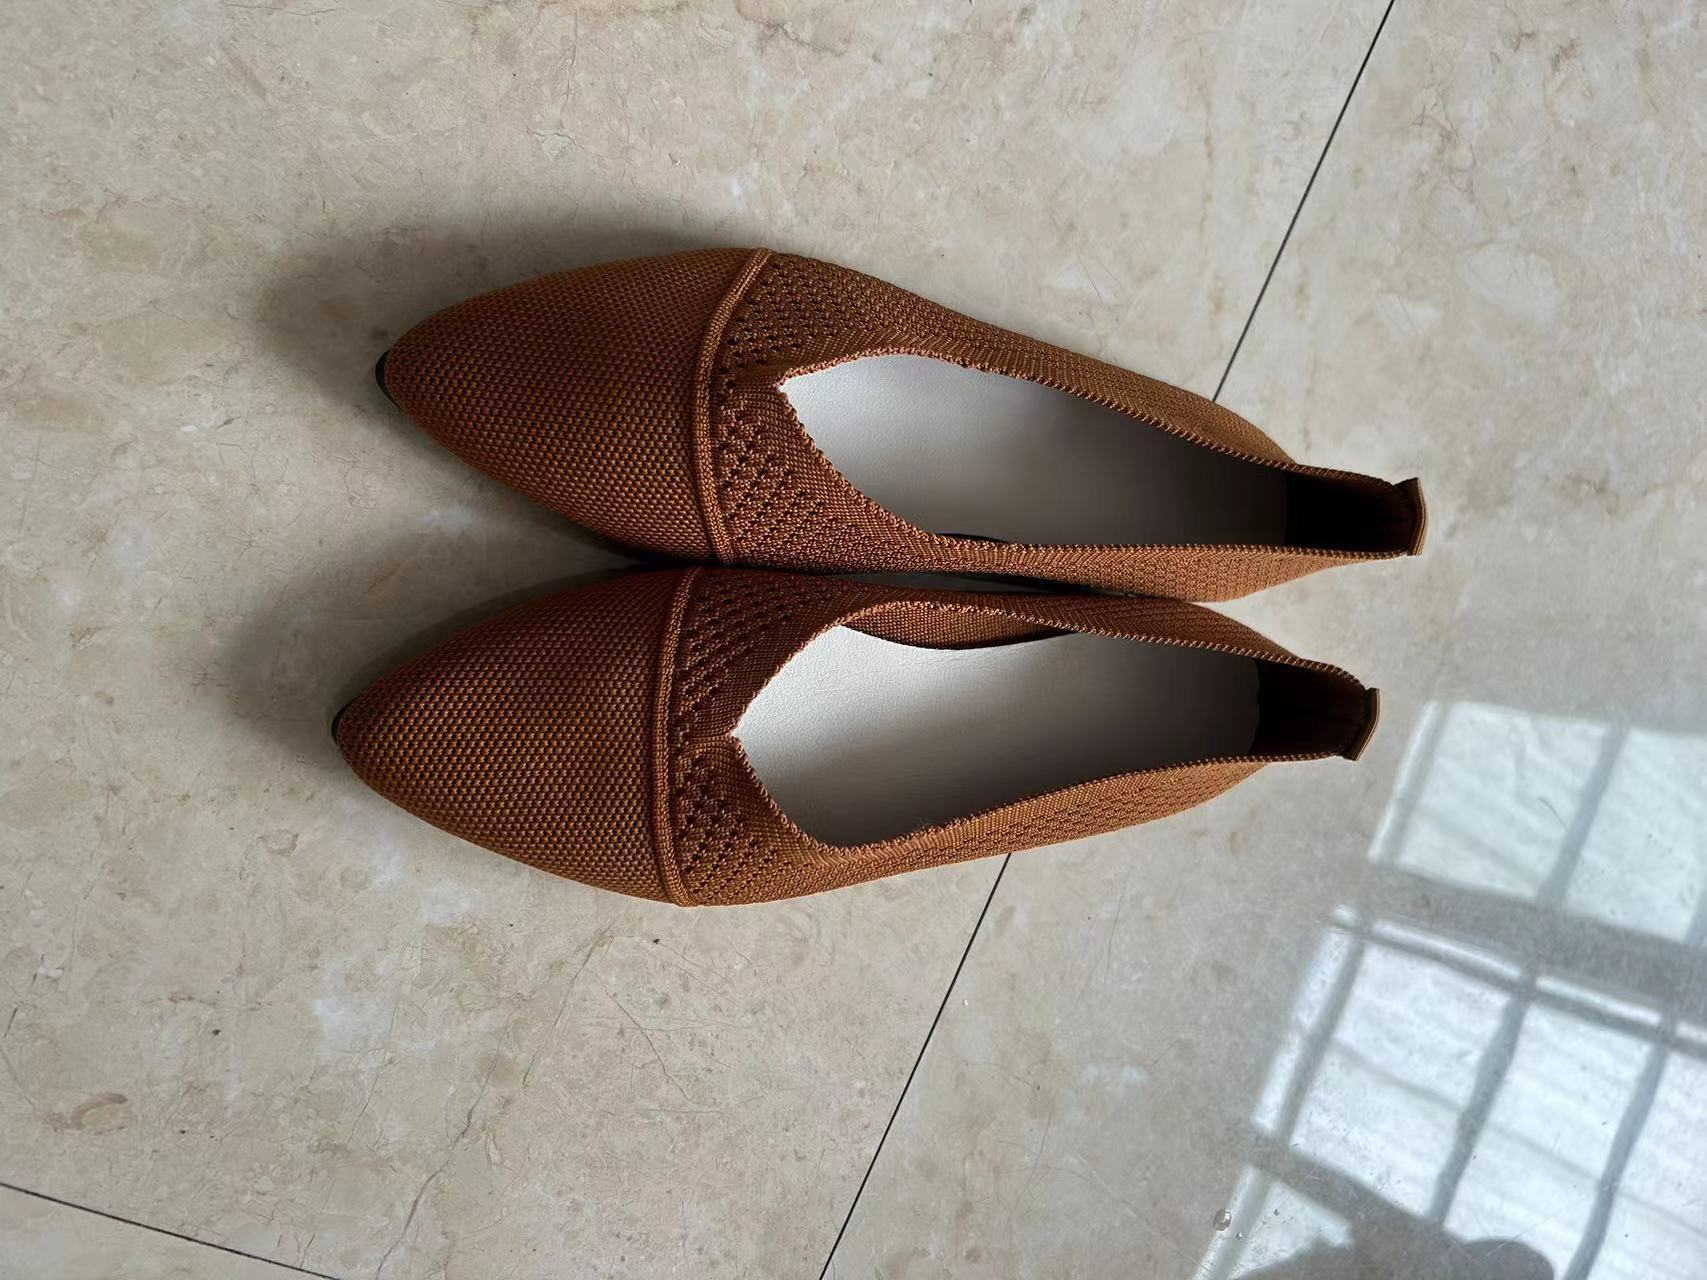 Plus Size Solid Color Pointed Flat Soft Sole Thin Shoes